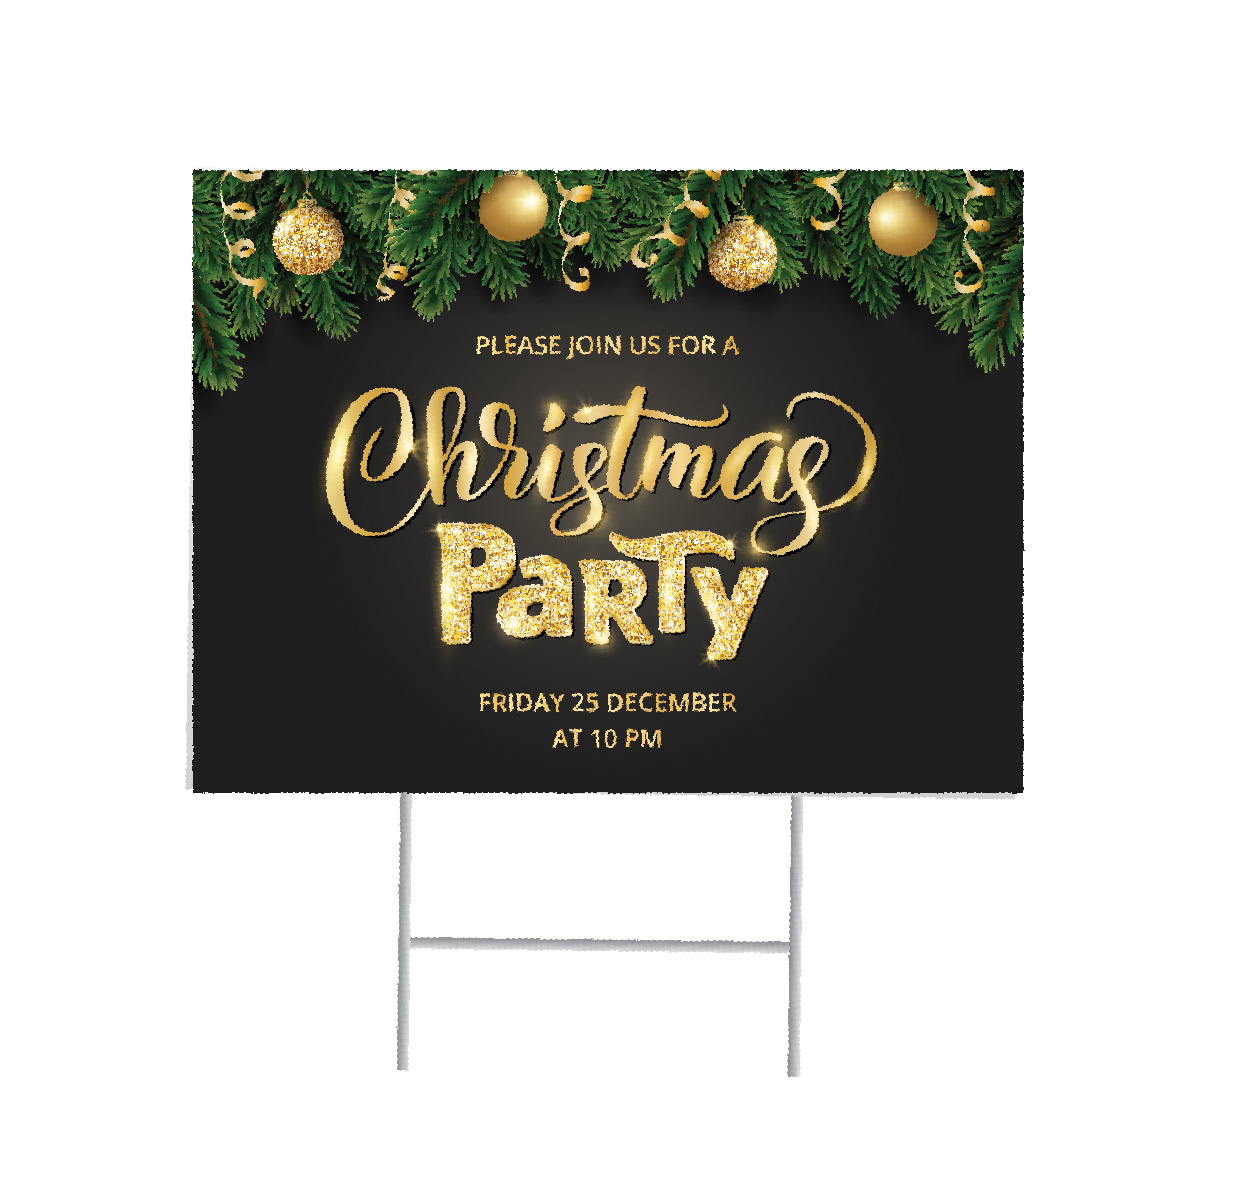 Example holiday yard sign for a Christmas party